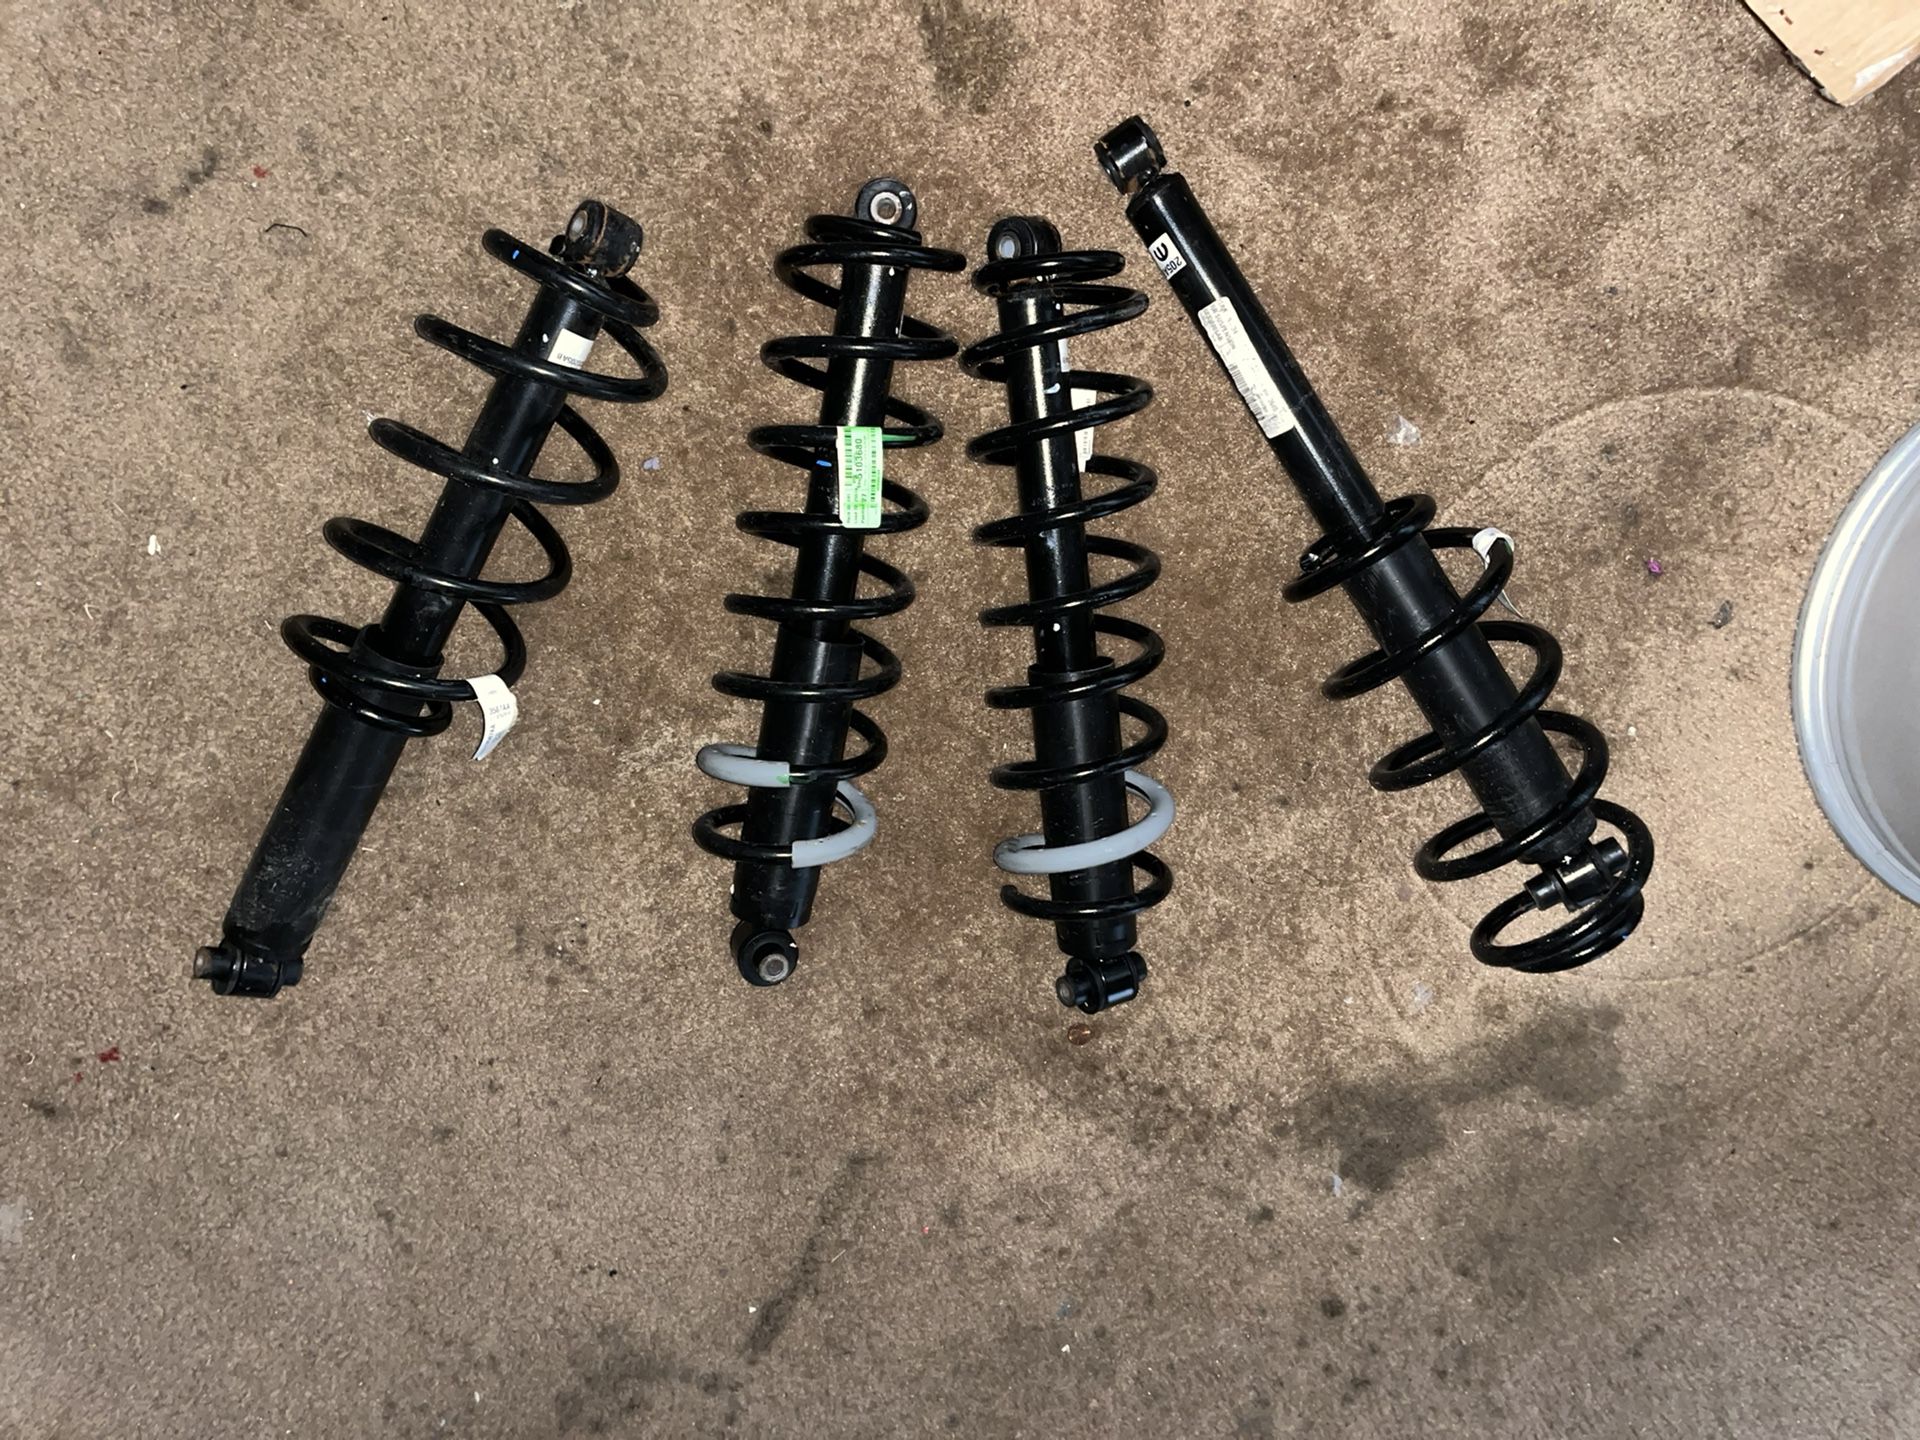 4 Jeep 2018 Weangler unlimited JL rims And Standard Shocks , Never Used 